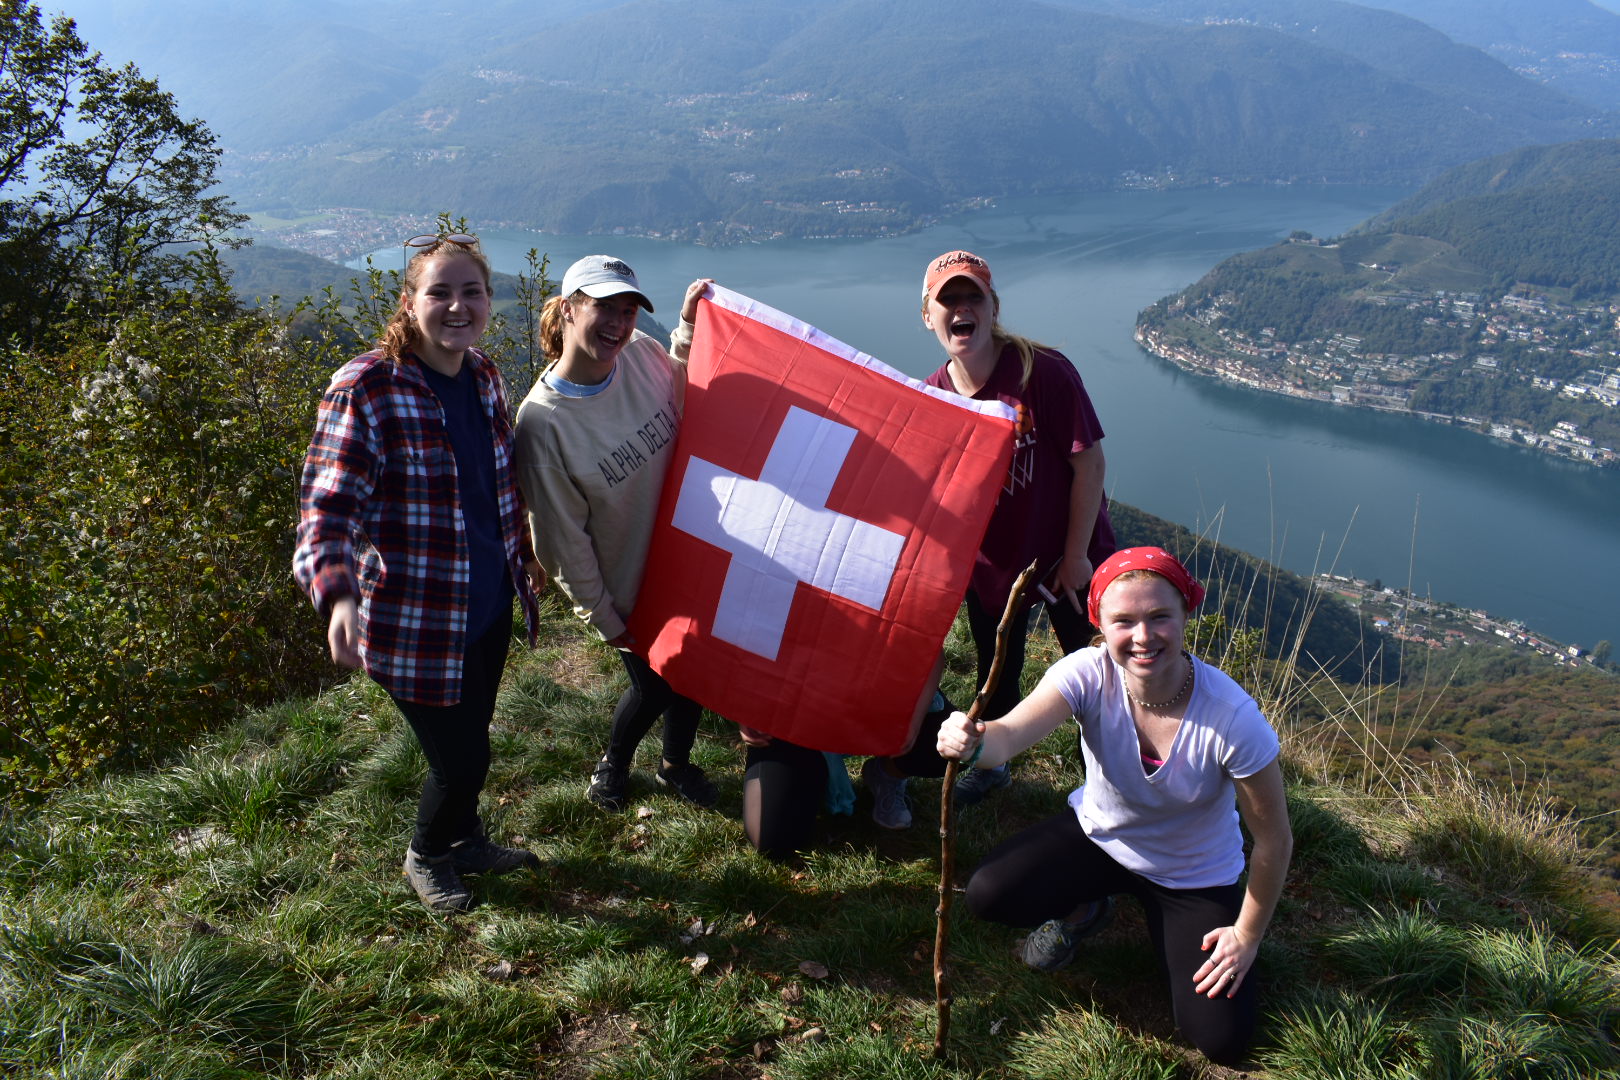 Shelly Worek spent a semester studying abroad in Switzerland.